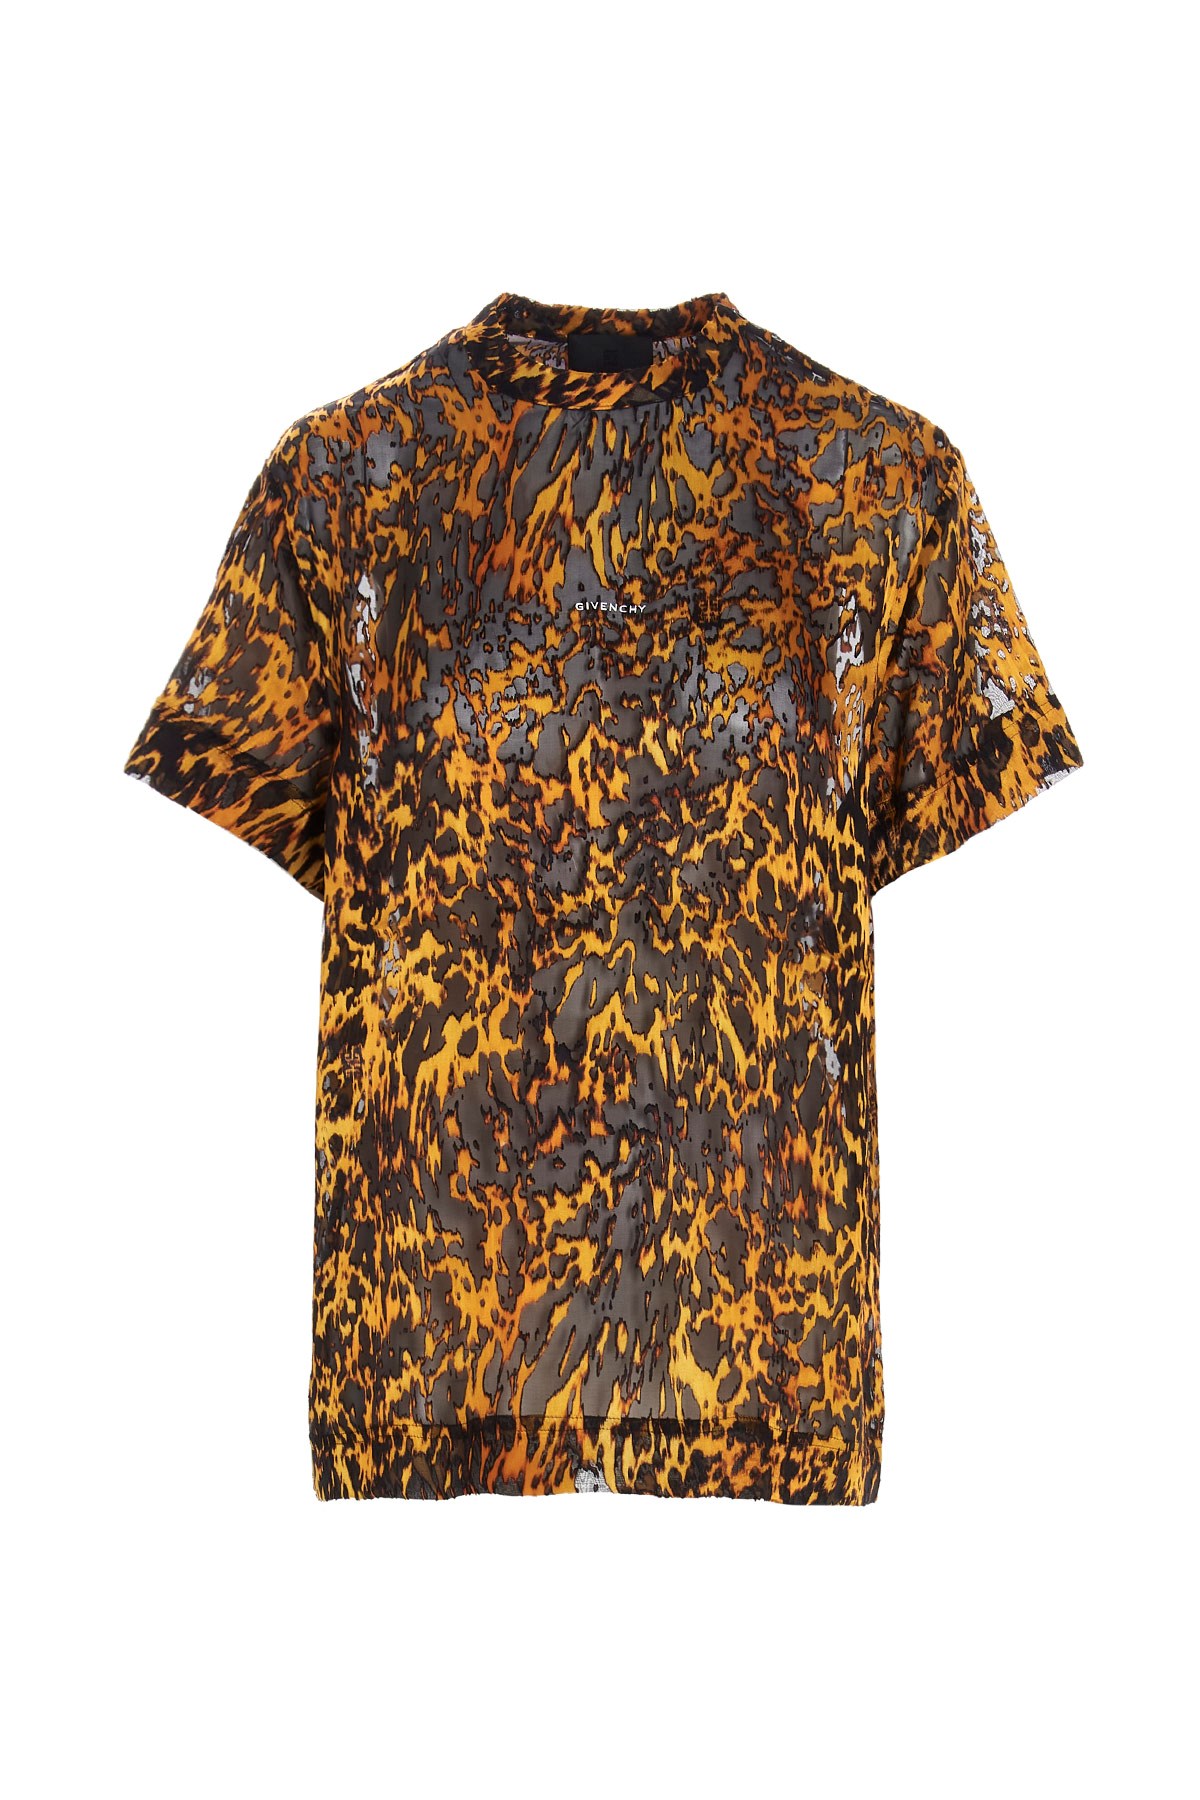 GIVENCHY T-Shirt 'Marble Discarge'